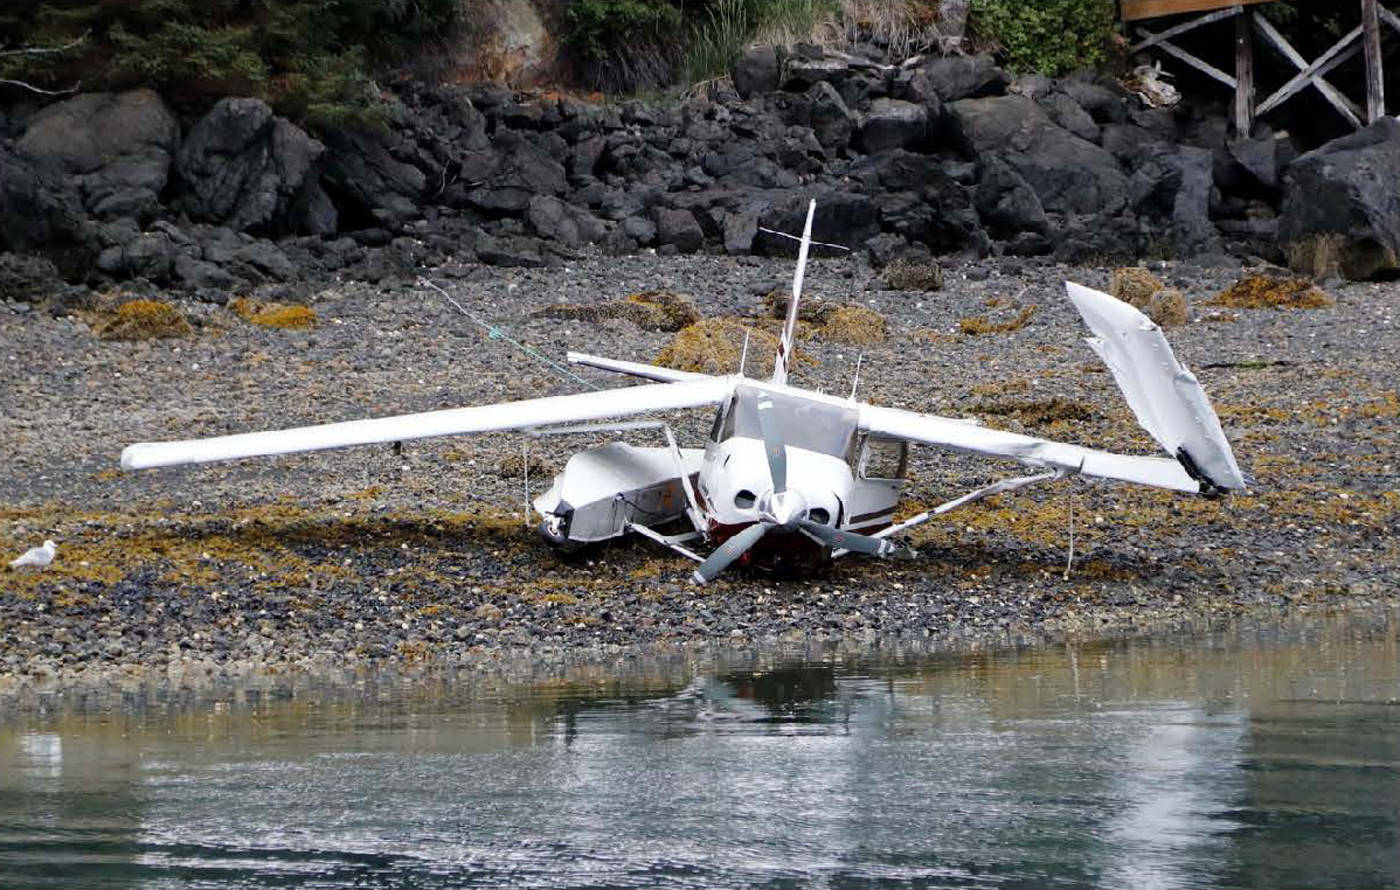 This photo from a National Transportation Safety Board report shows Alaska Dispatch News owner Alice Rogoff’s Cessna 206 on the beach, sans floats, after a crash landing into the water on July 3, 2016 in Halibut Cove, Alaska. The NTSB noted in its report that Rogoff’s attempted landing happened over glassy water conditions. (Photo courtesy NTSB)